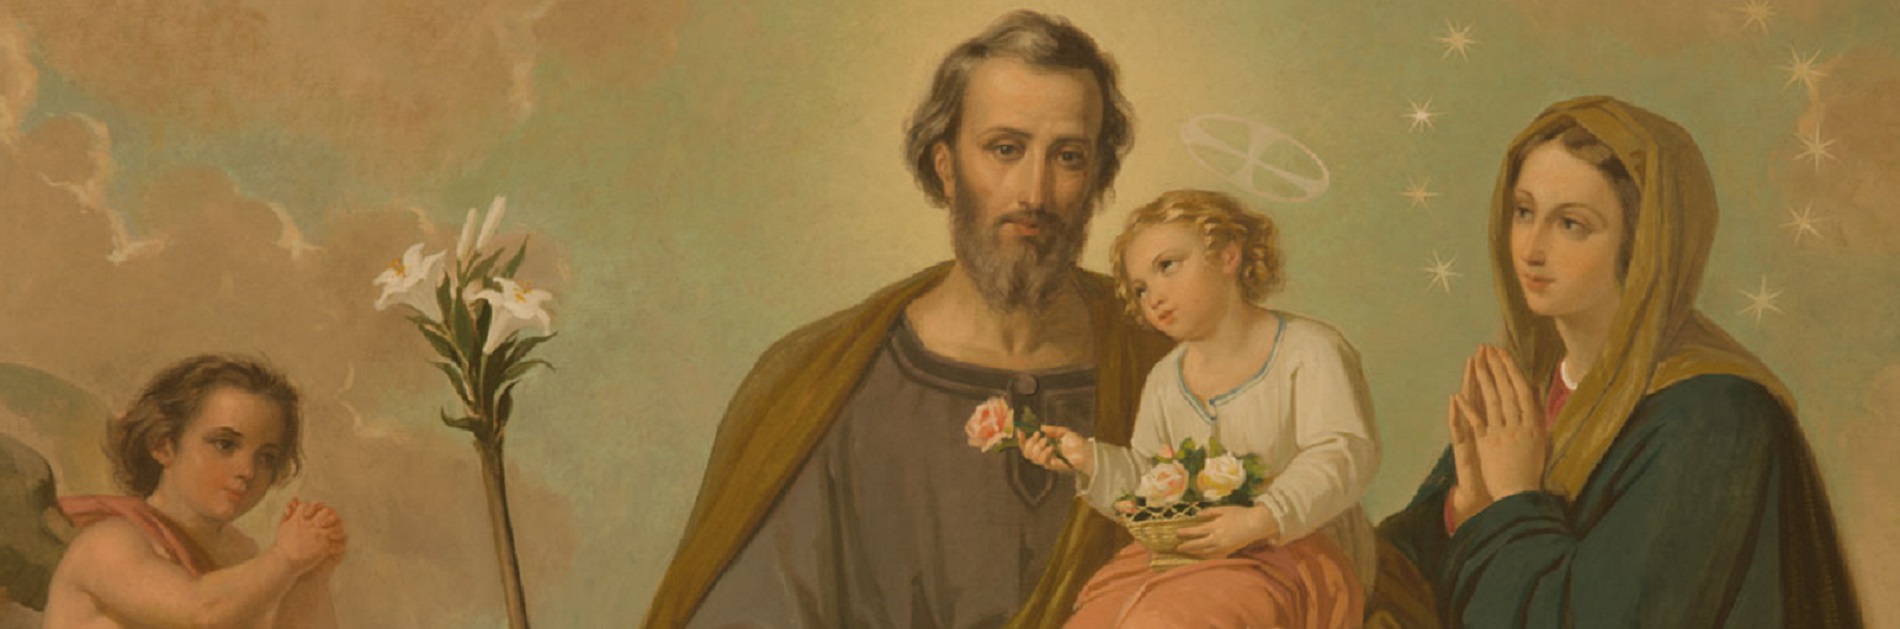 st. Joseph with Mary and young Jesus